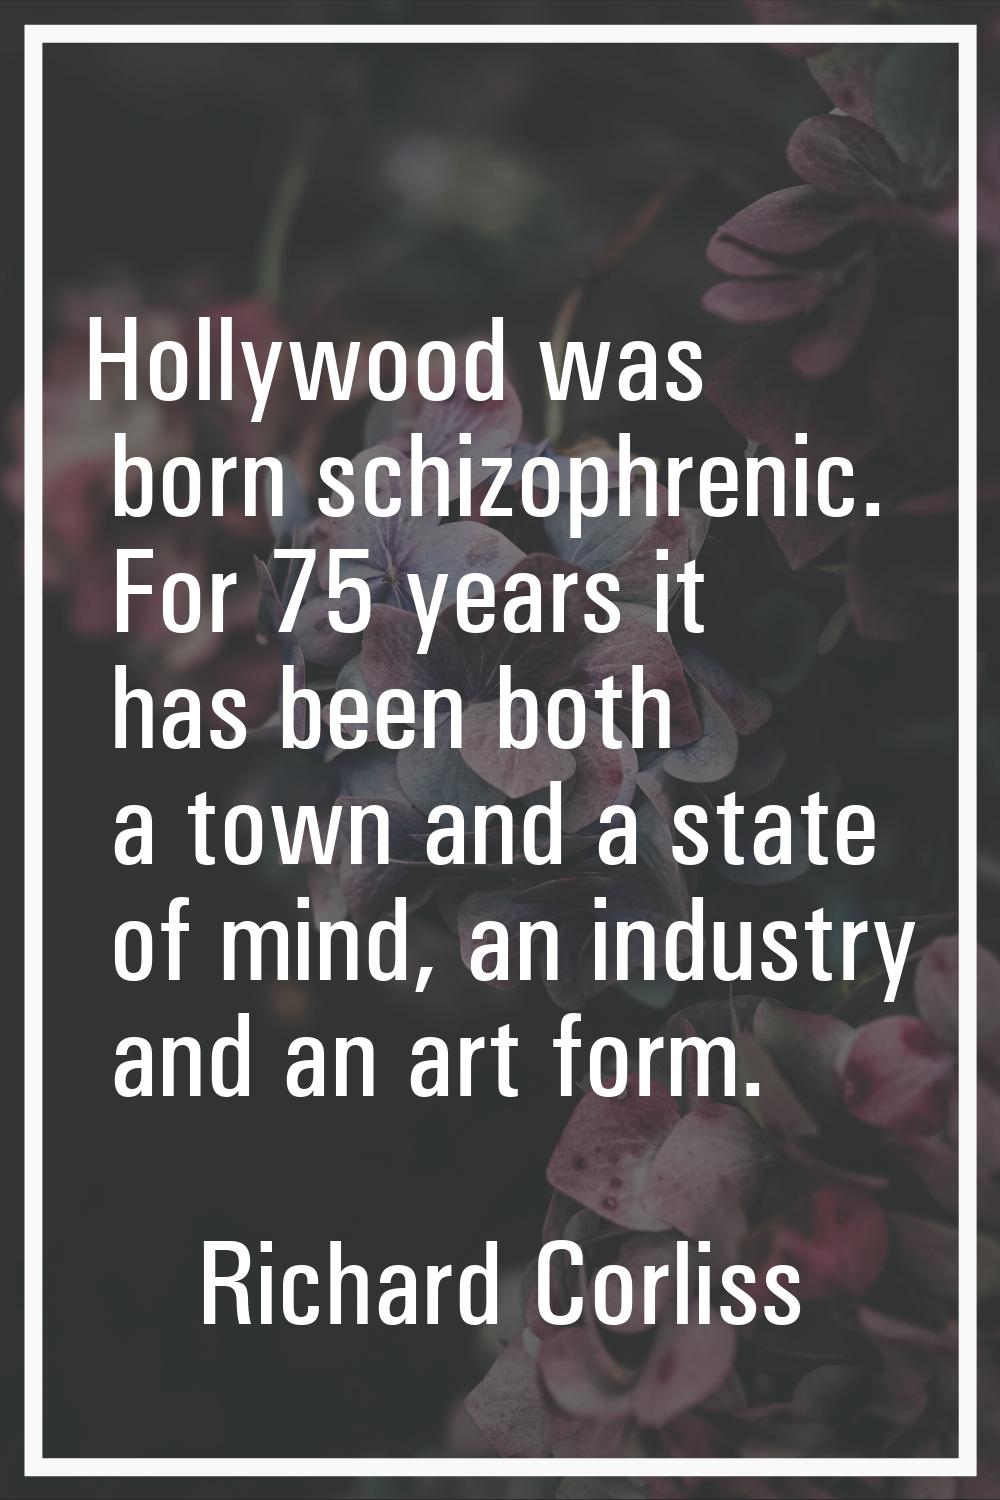 Hollywood was born schizophrenic. For 75 years it has been both a town and a state of mind, an indu